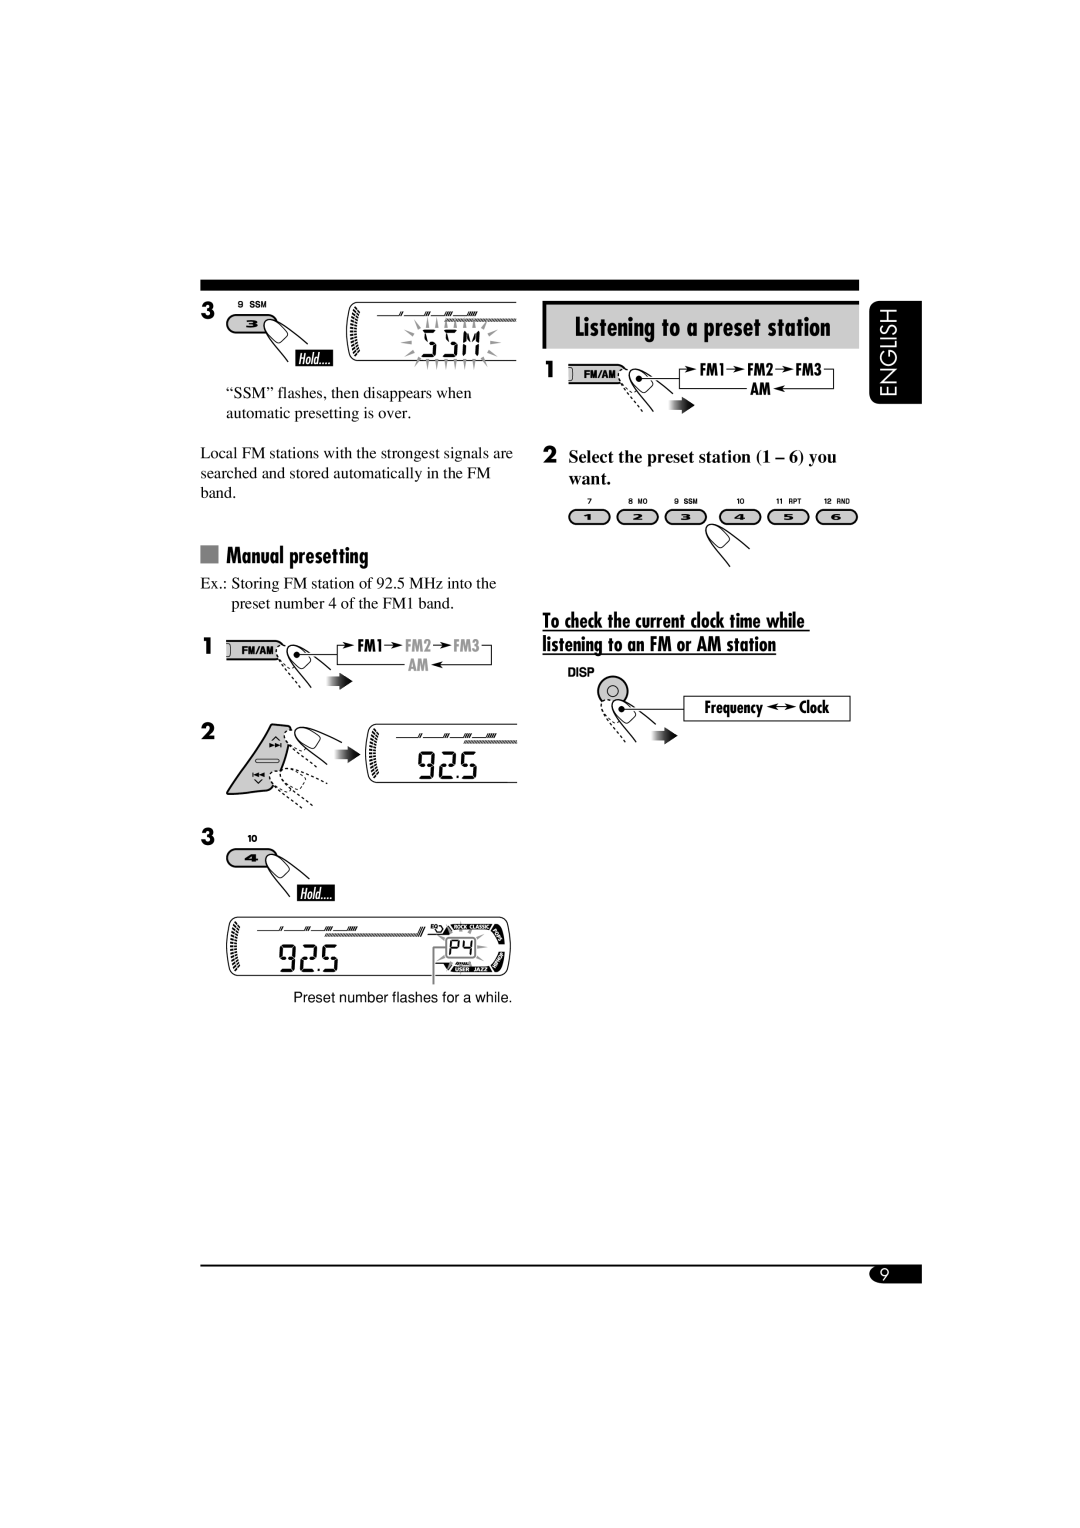 JVC KD-S12 manual Manual presetting, 2Select the preset station 1 - 6 you want, Listening to a preset station, English 